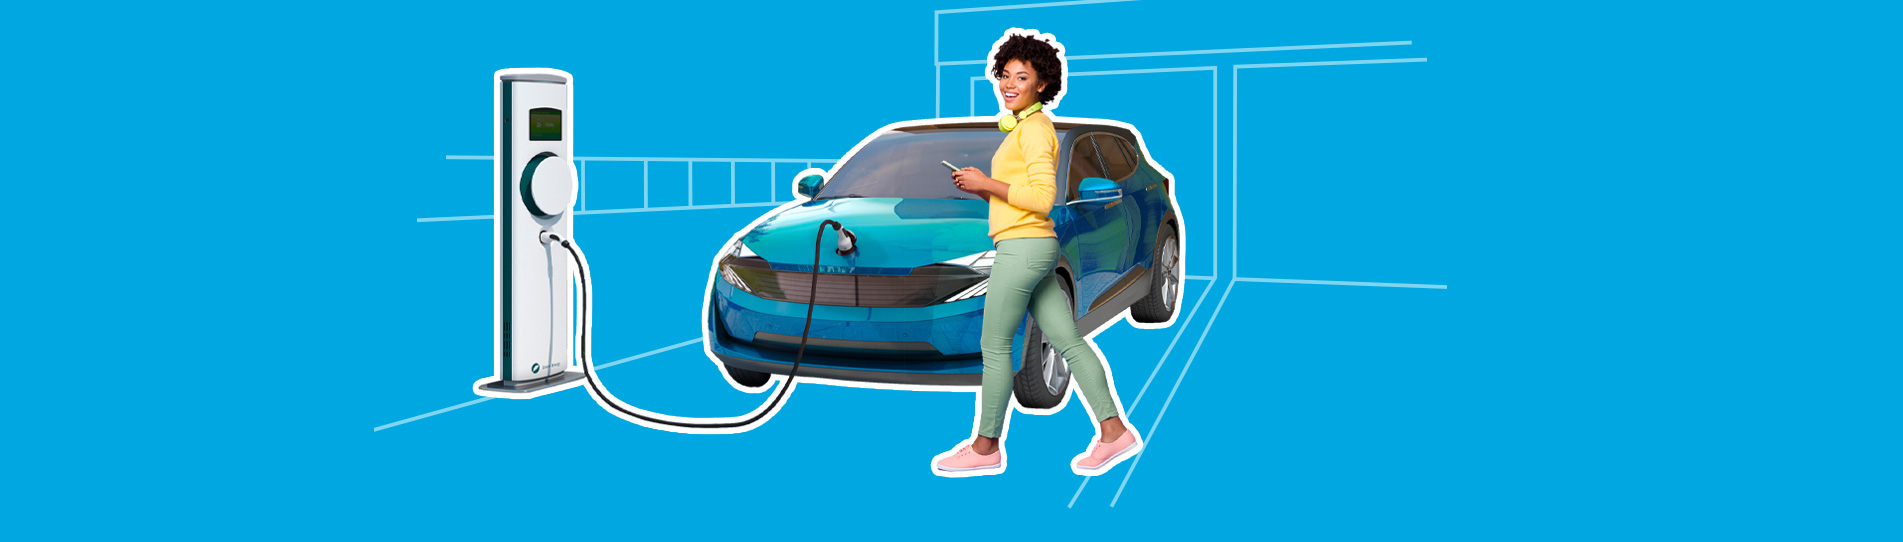 smiling woman beside charging electric vehicle